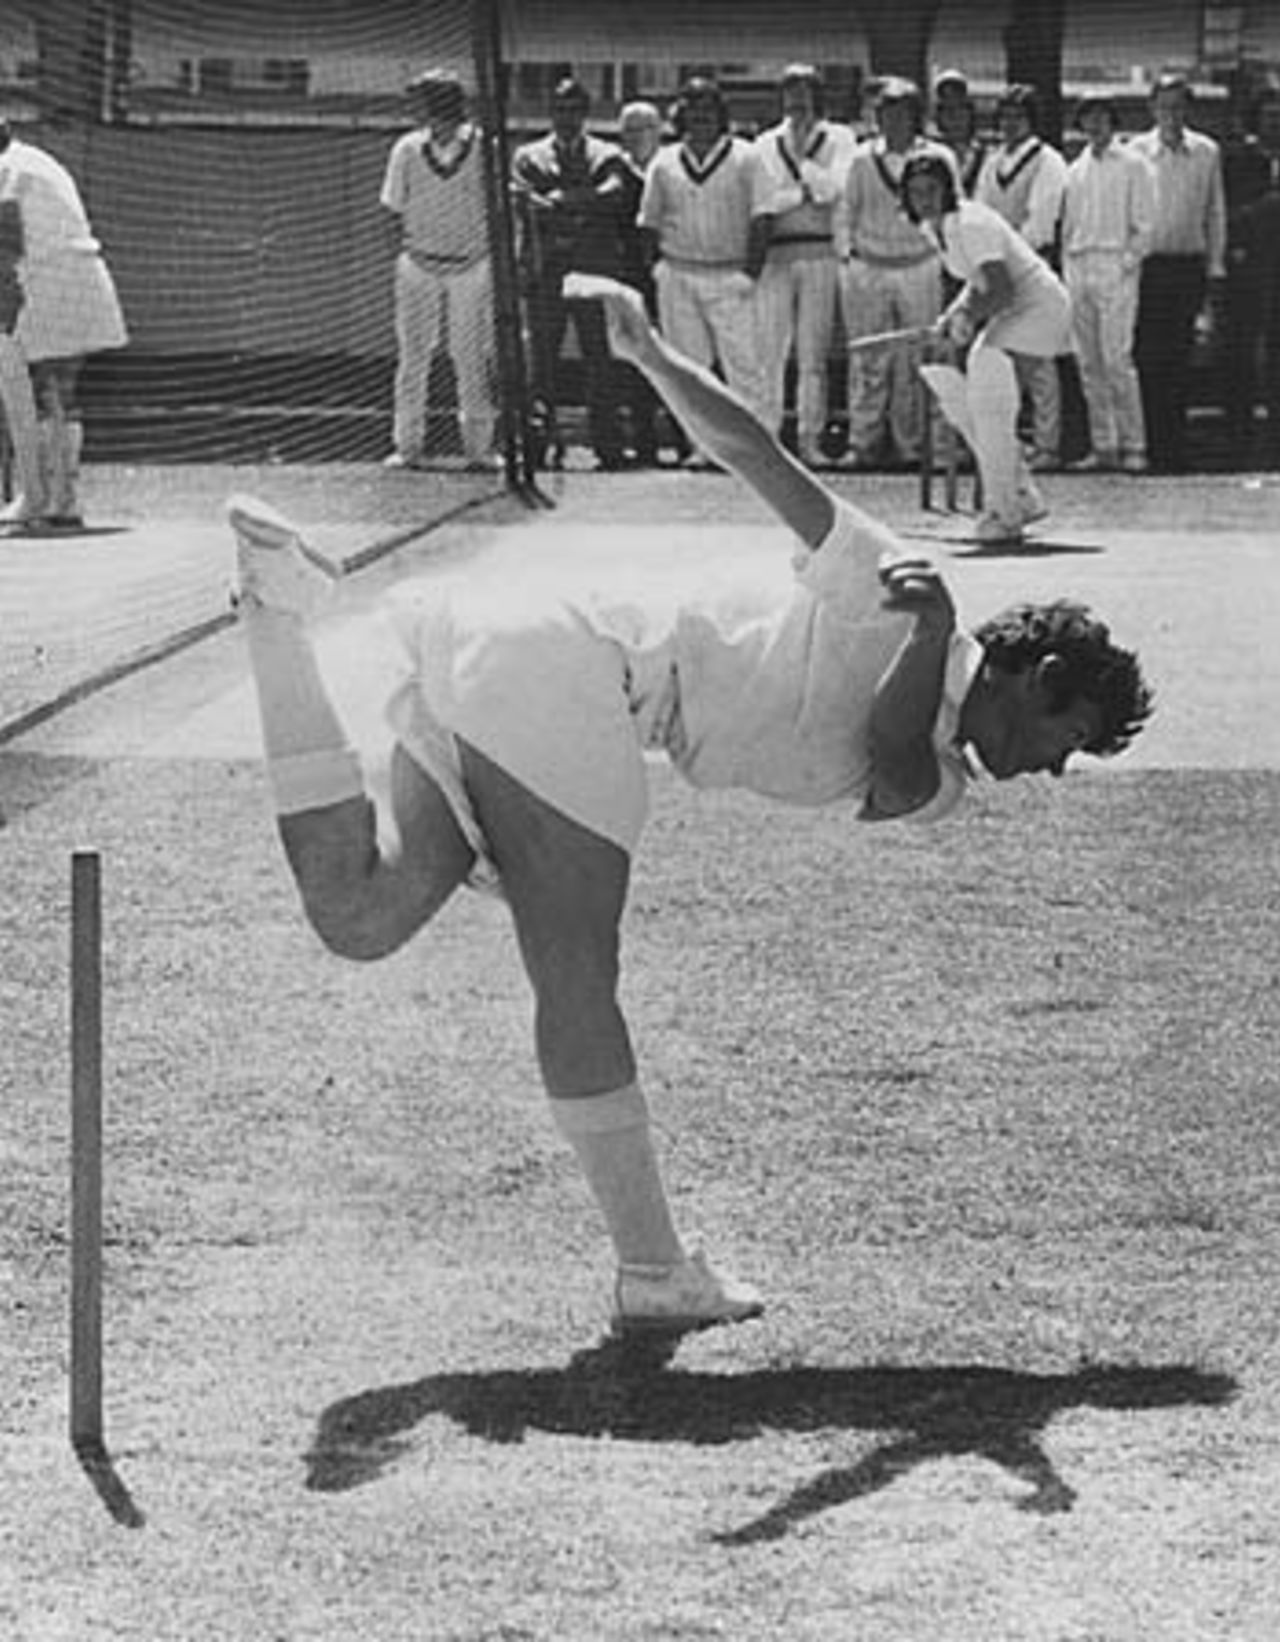 Australia's Anne Gordon bowls to Sharon Tredrea in the nets at Lord's ahead of the 1973 World Cup, June 13, 1973